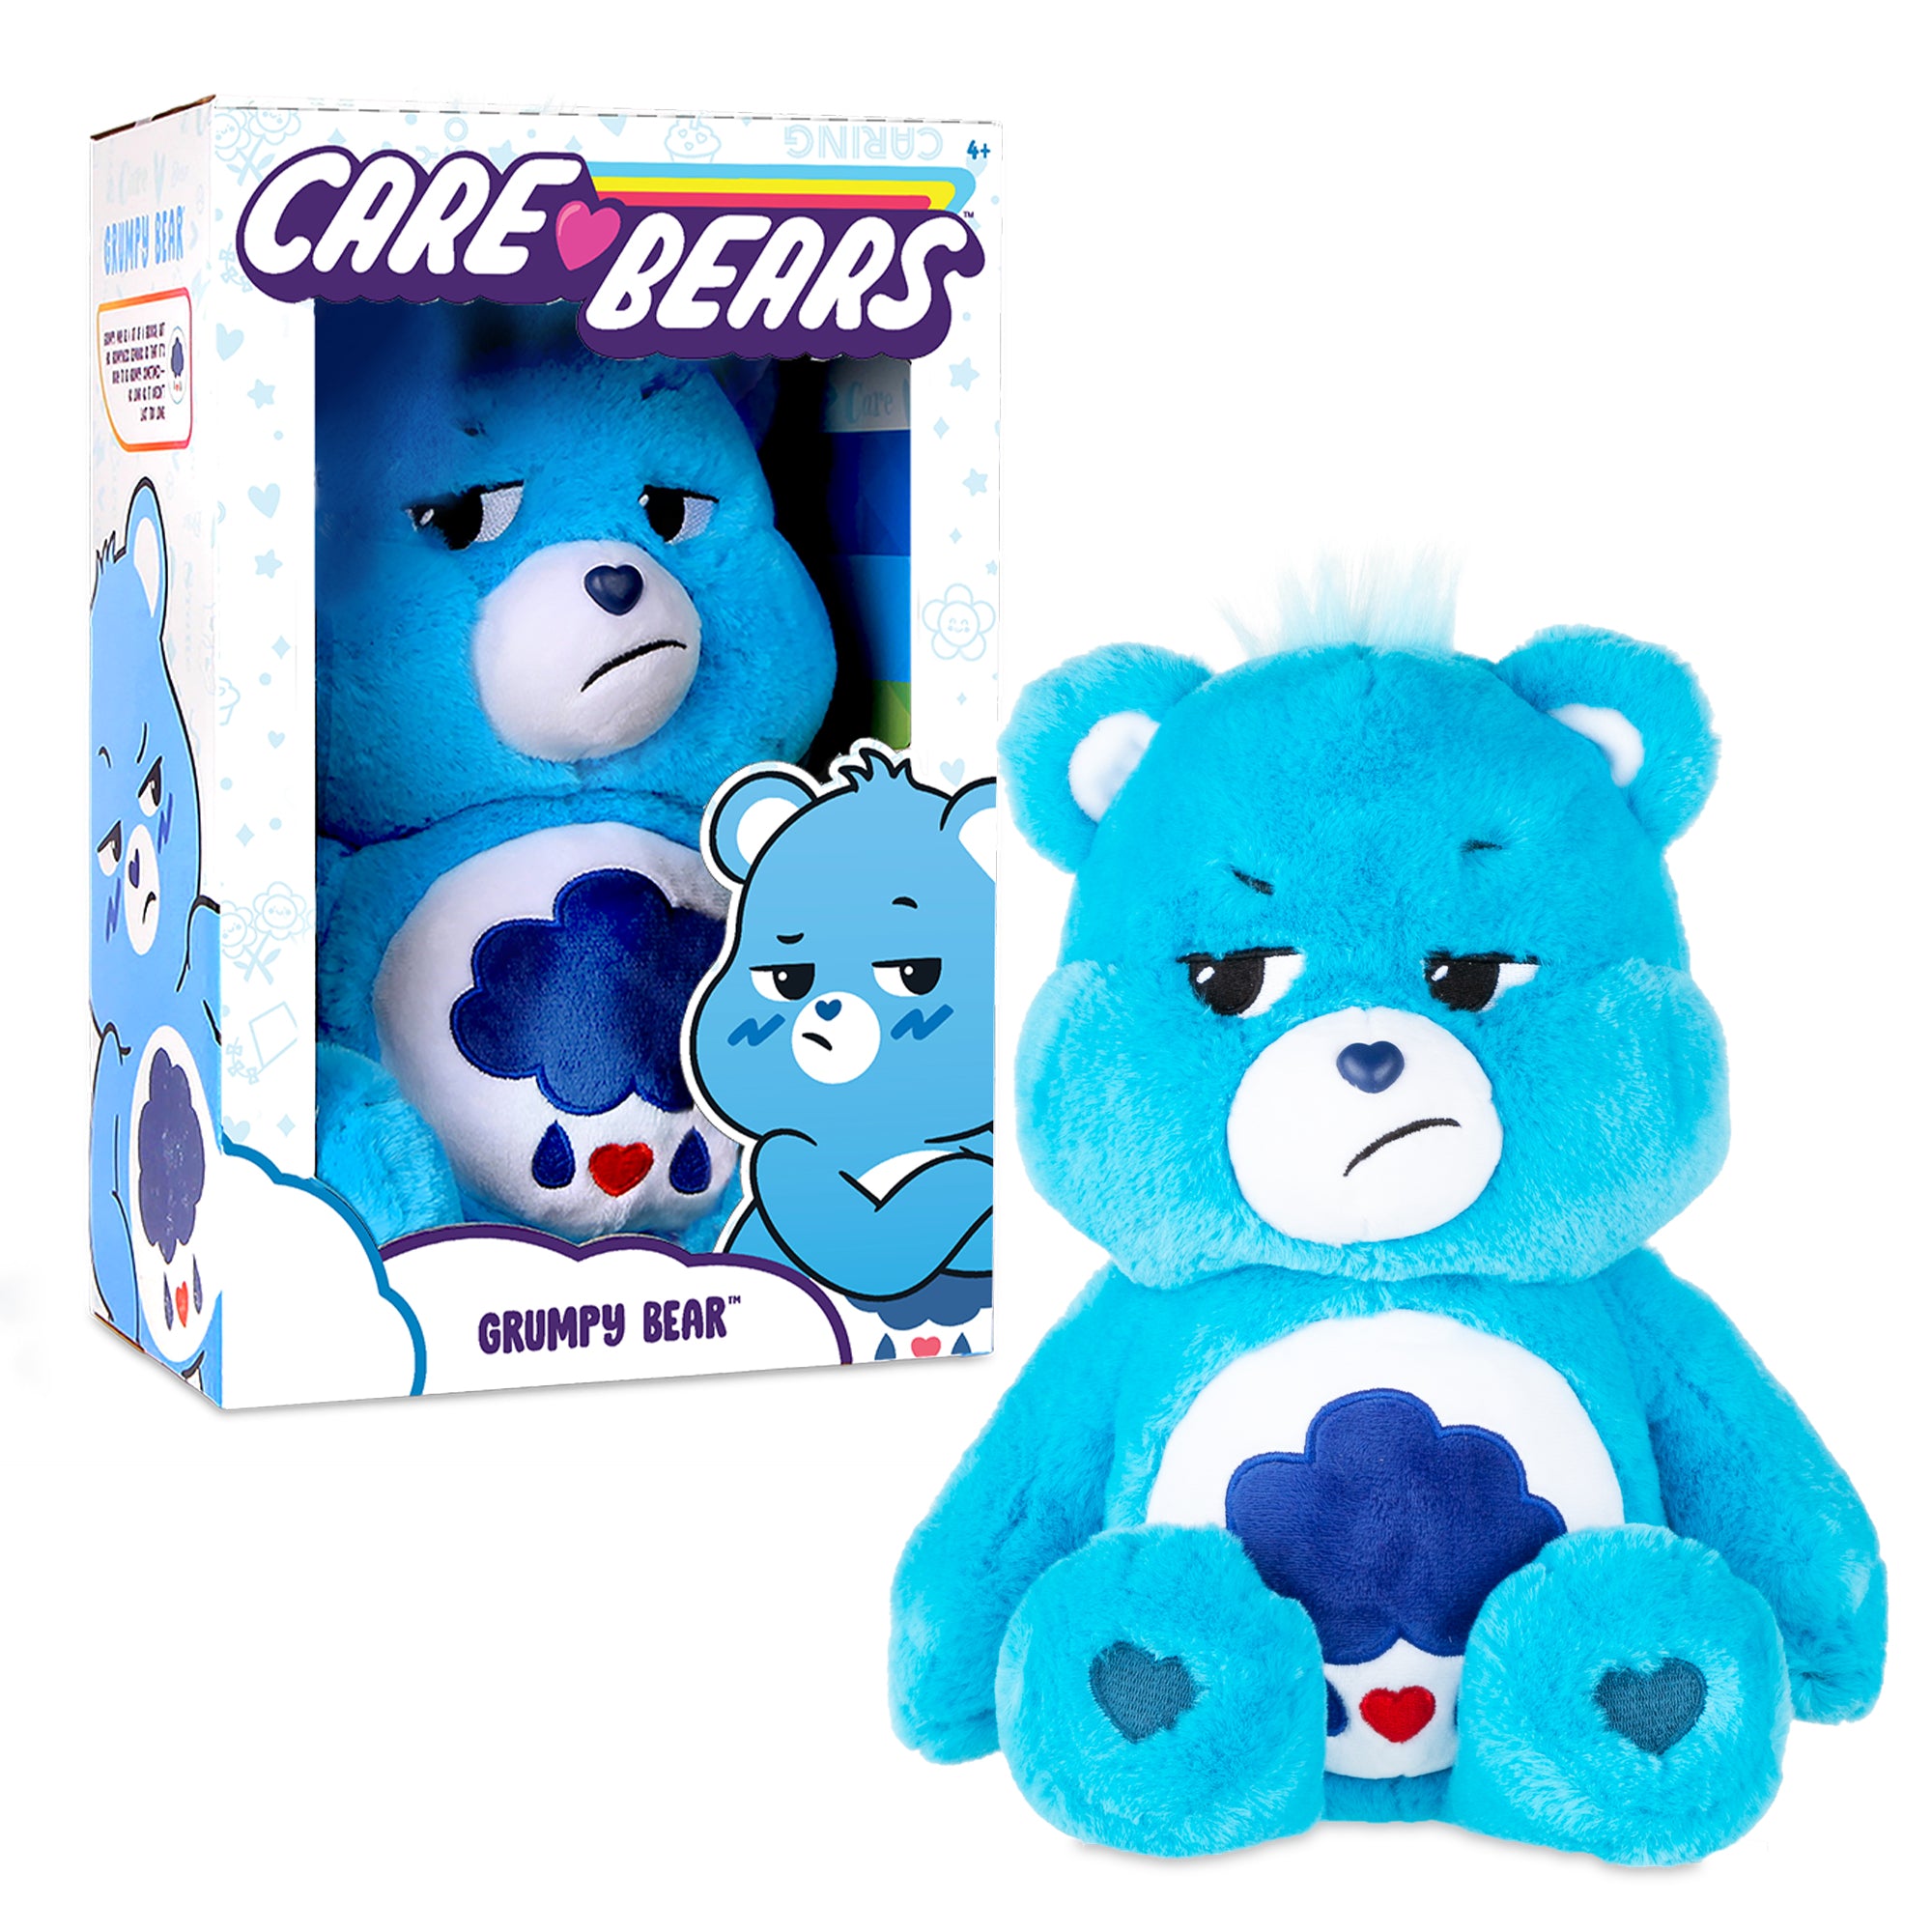 Care Bears 9 Bean Plush - Special Collector Set - Exclusive Do-Your-Best Bear Included!